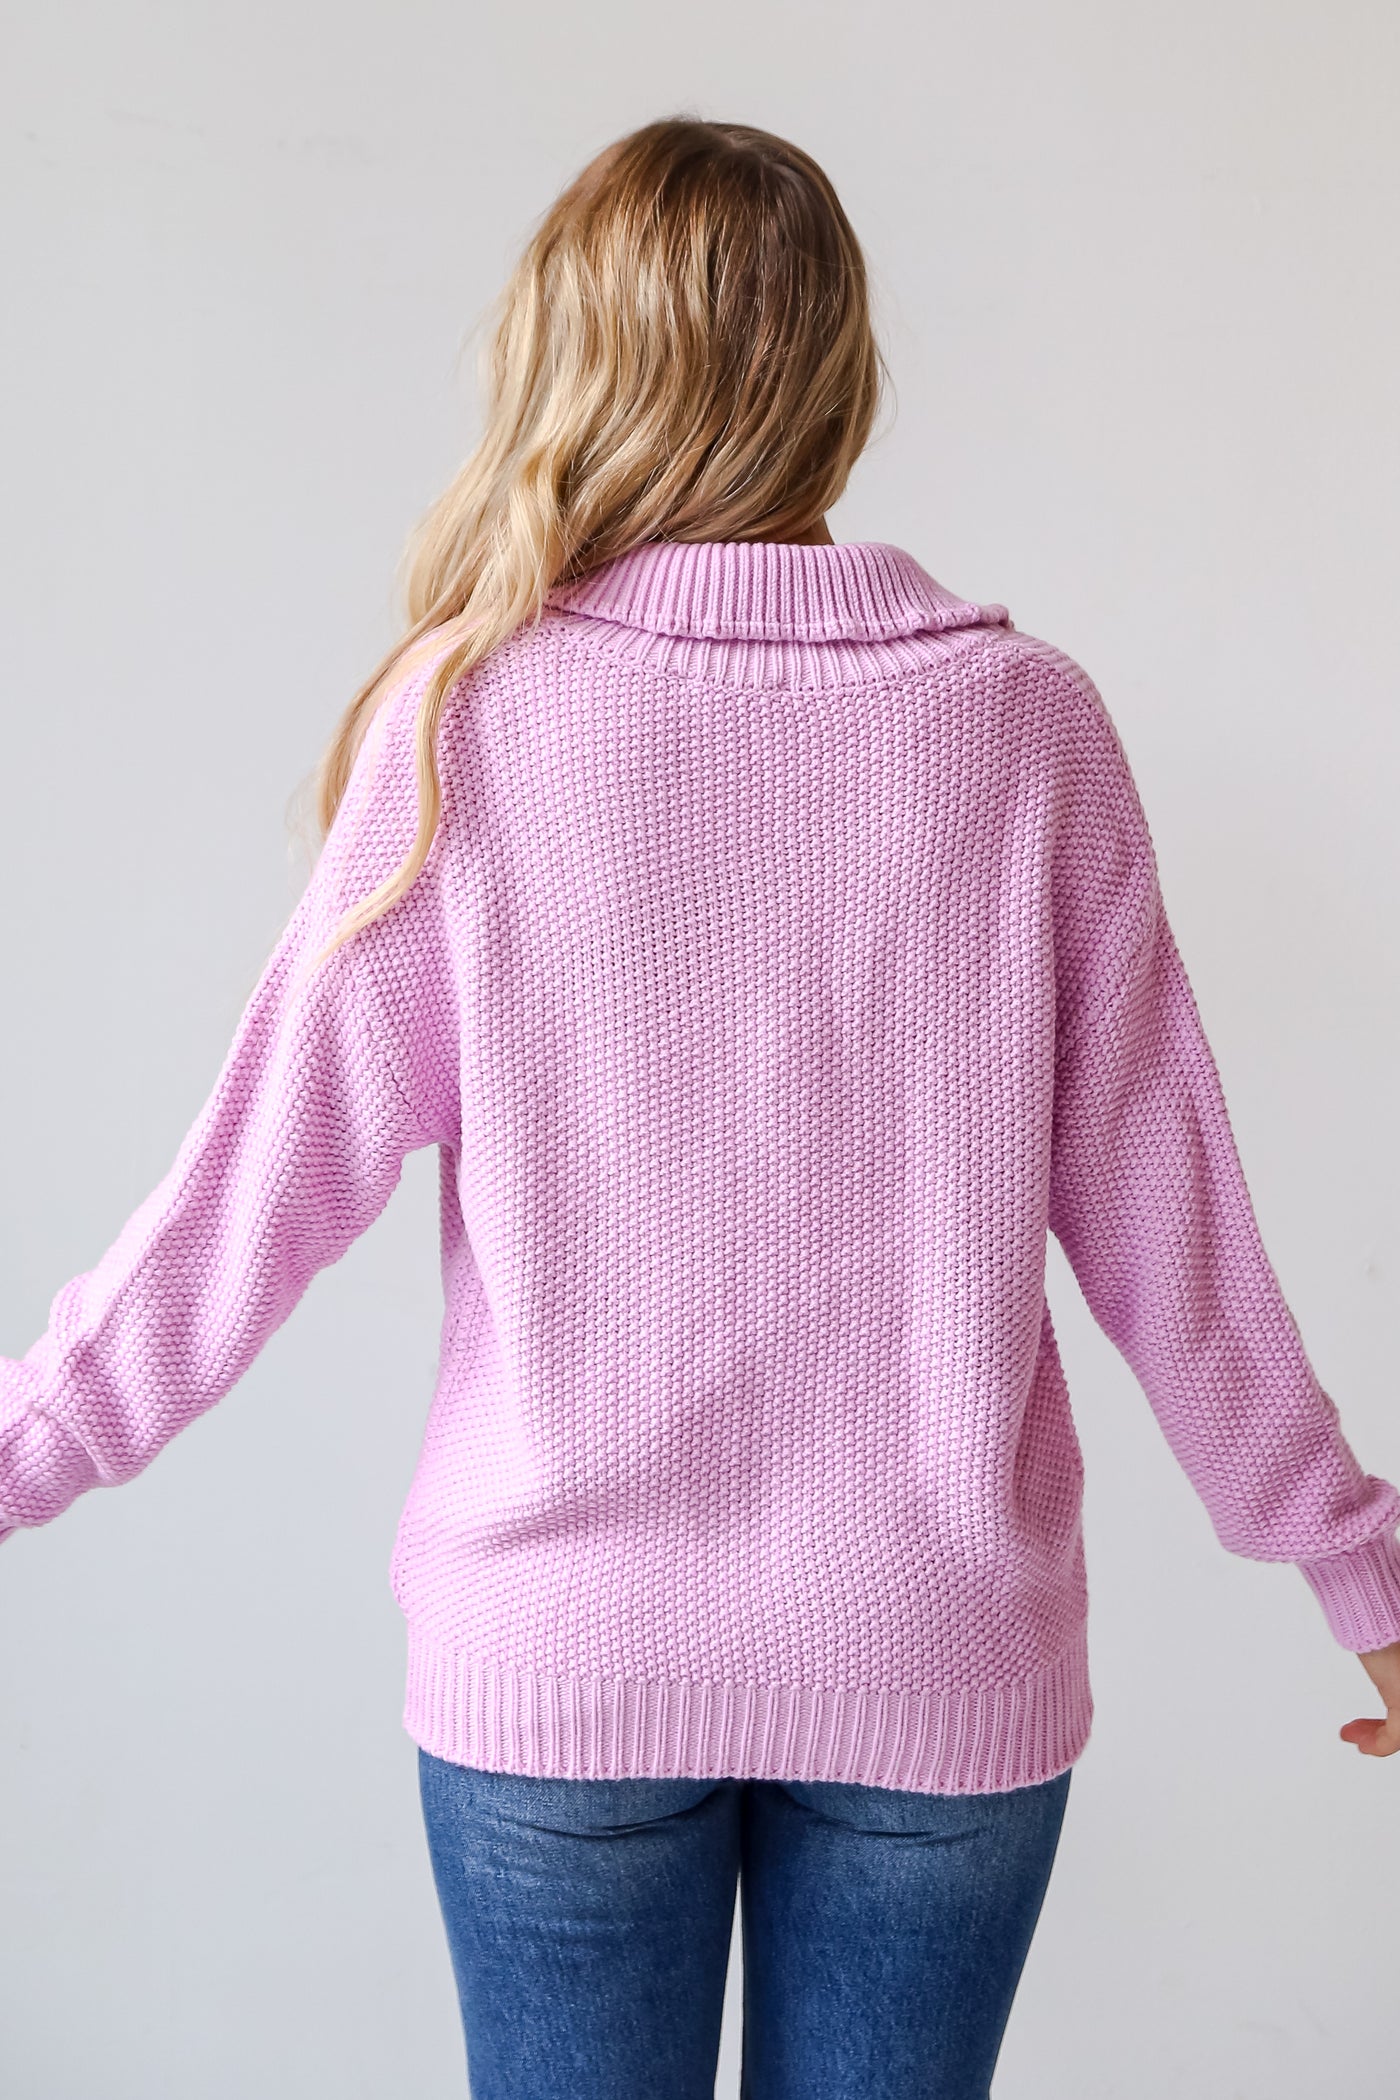 purple Collared Oversized Sweater back view